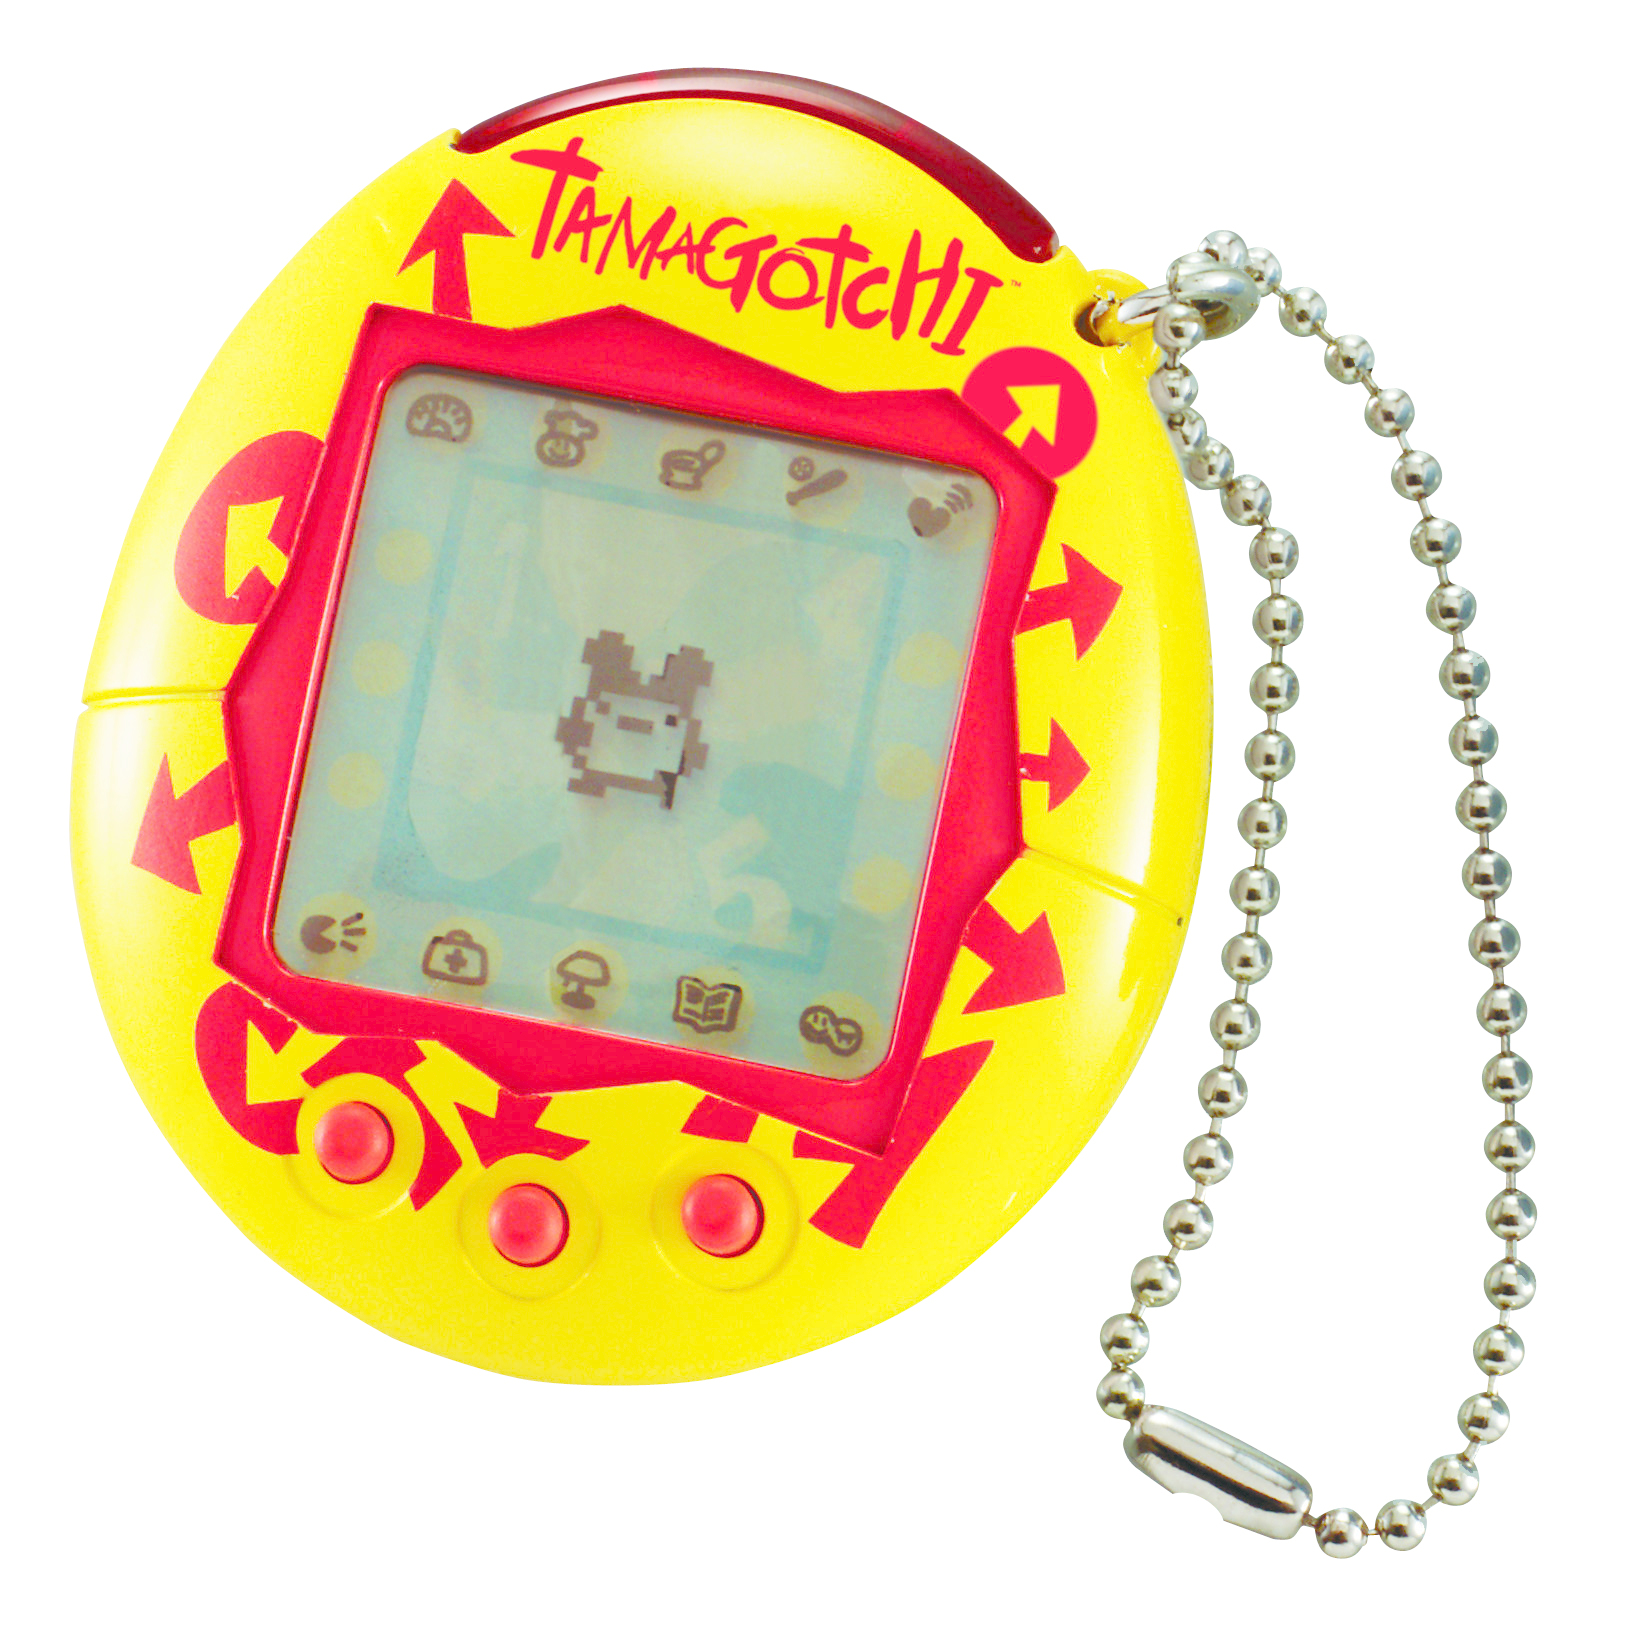 1997: How many days did your Tamagotchi survive?